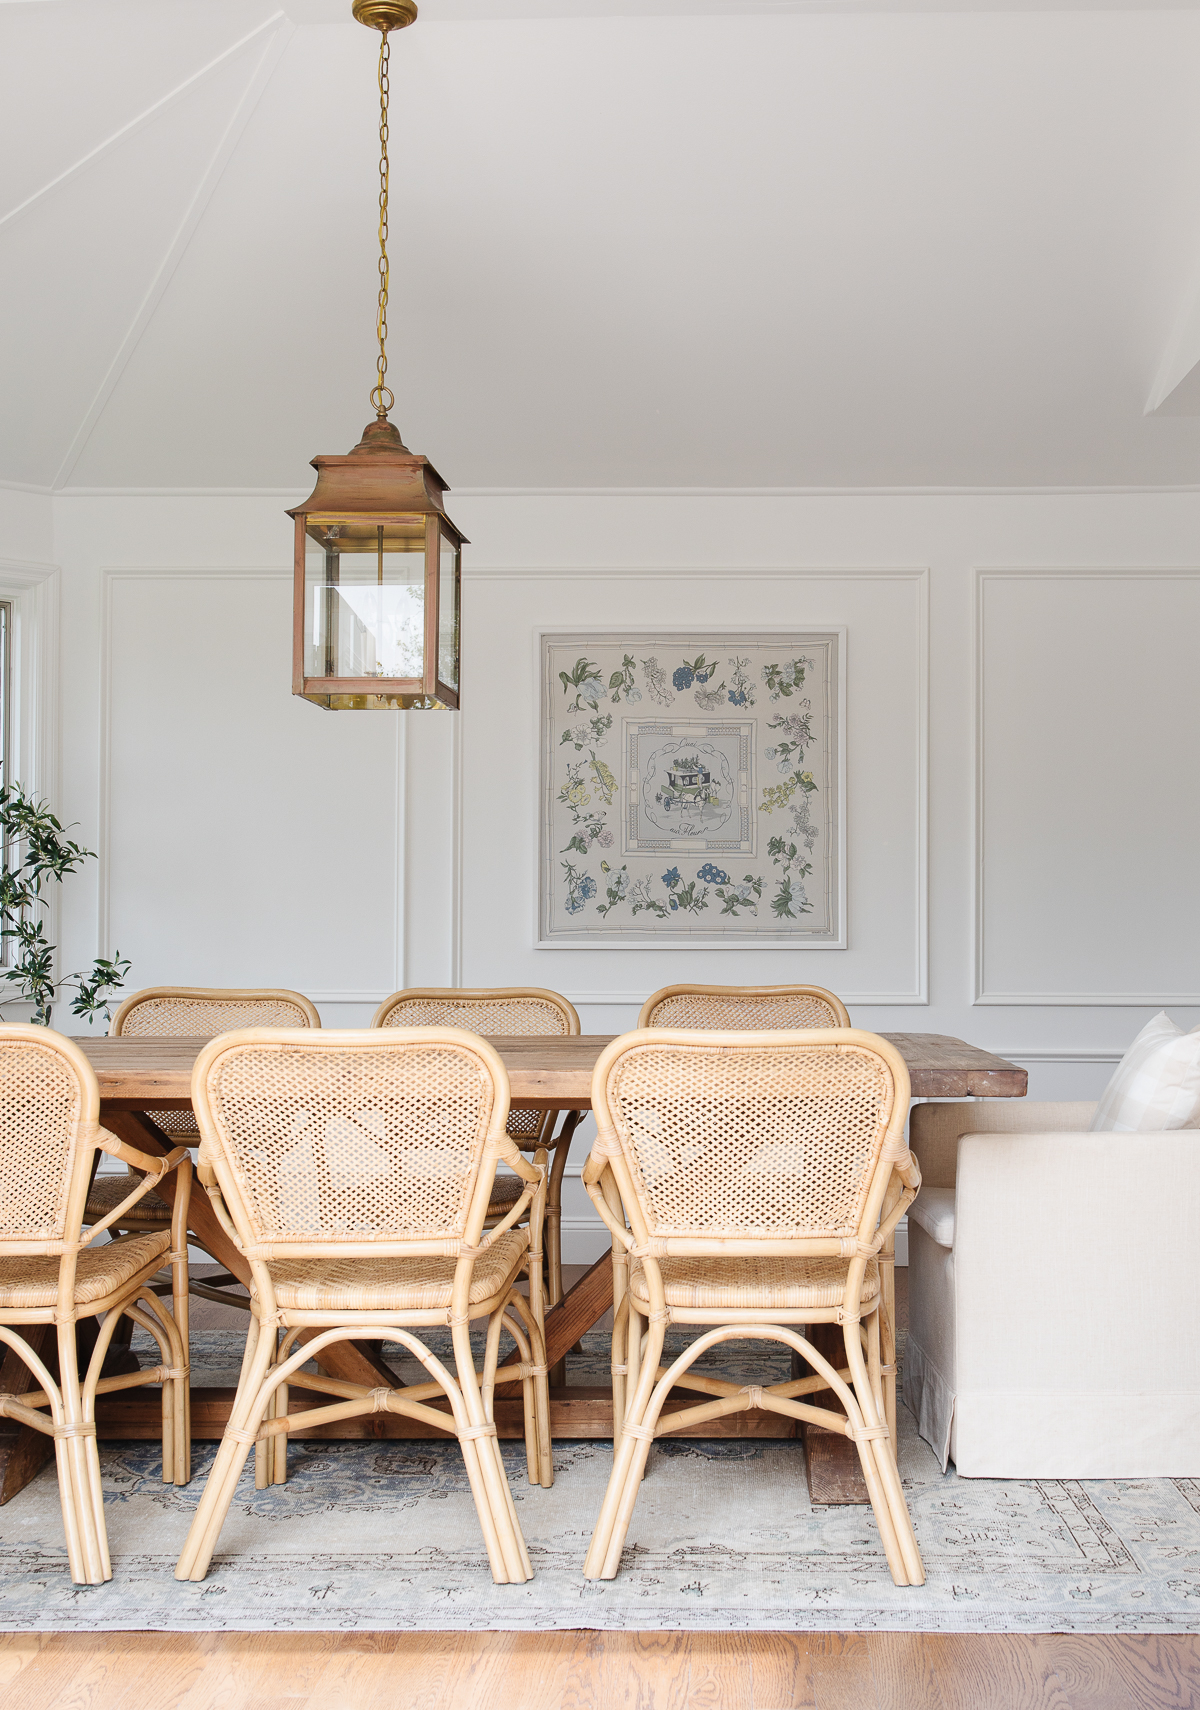 A traditional Thanksgiving dining room with a wicker table and chairs.